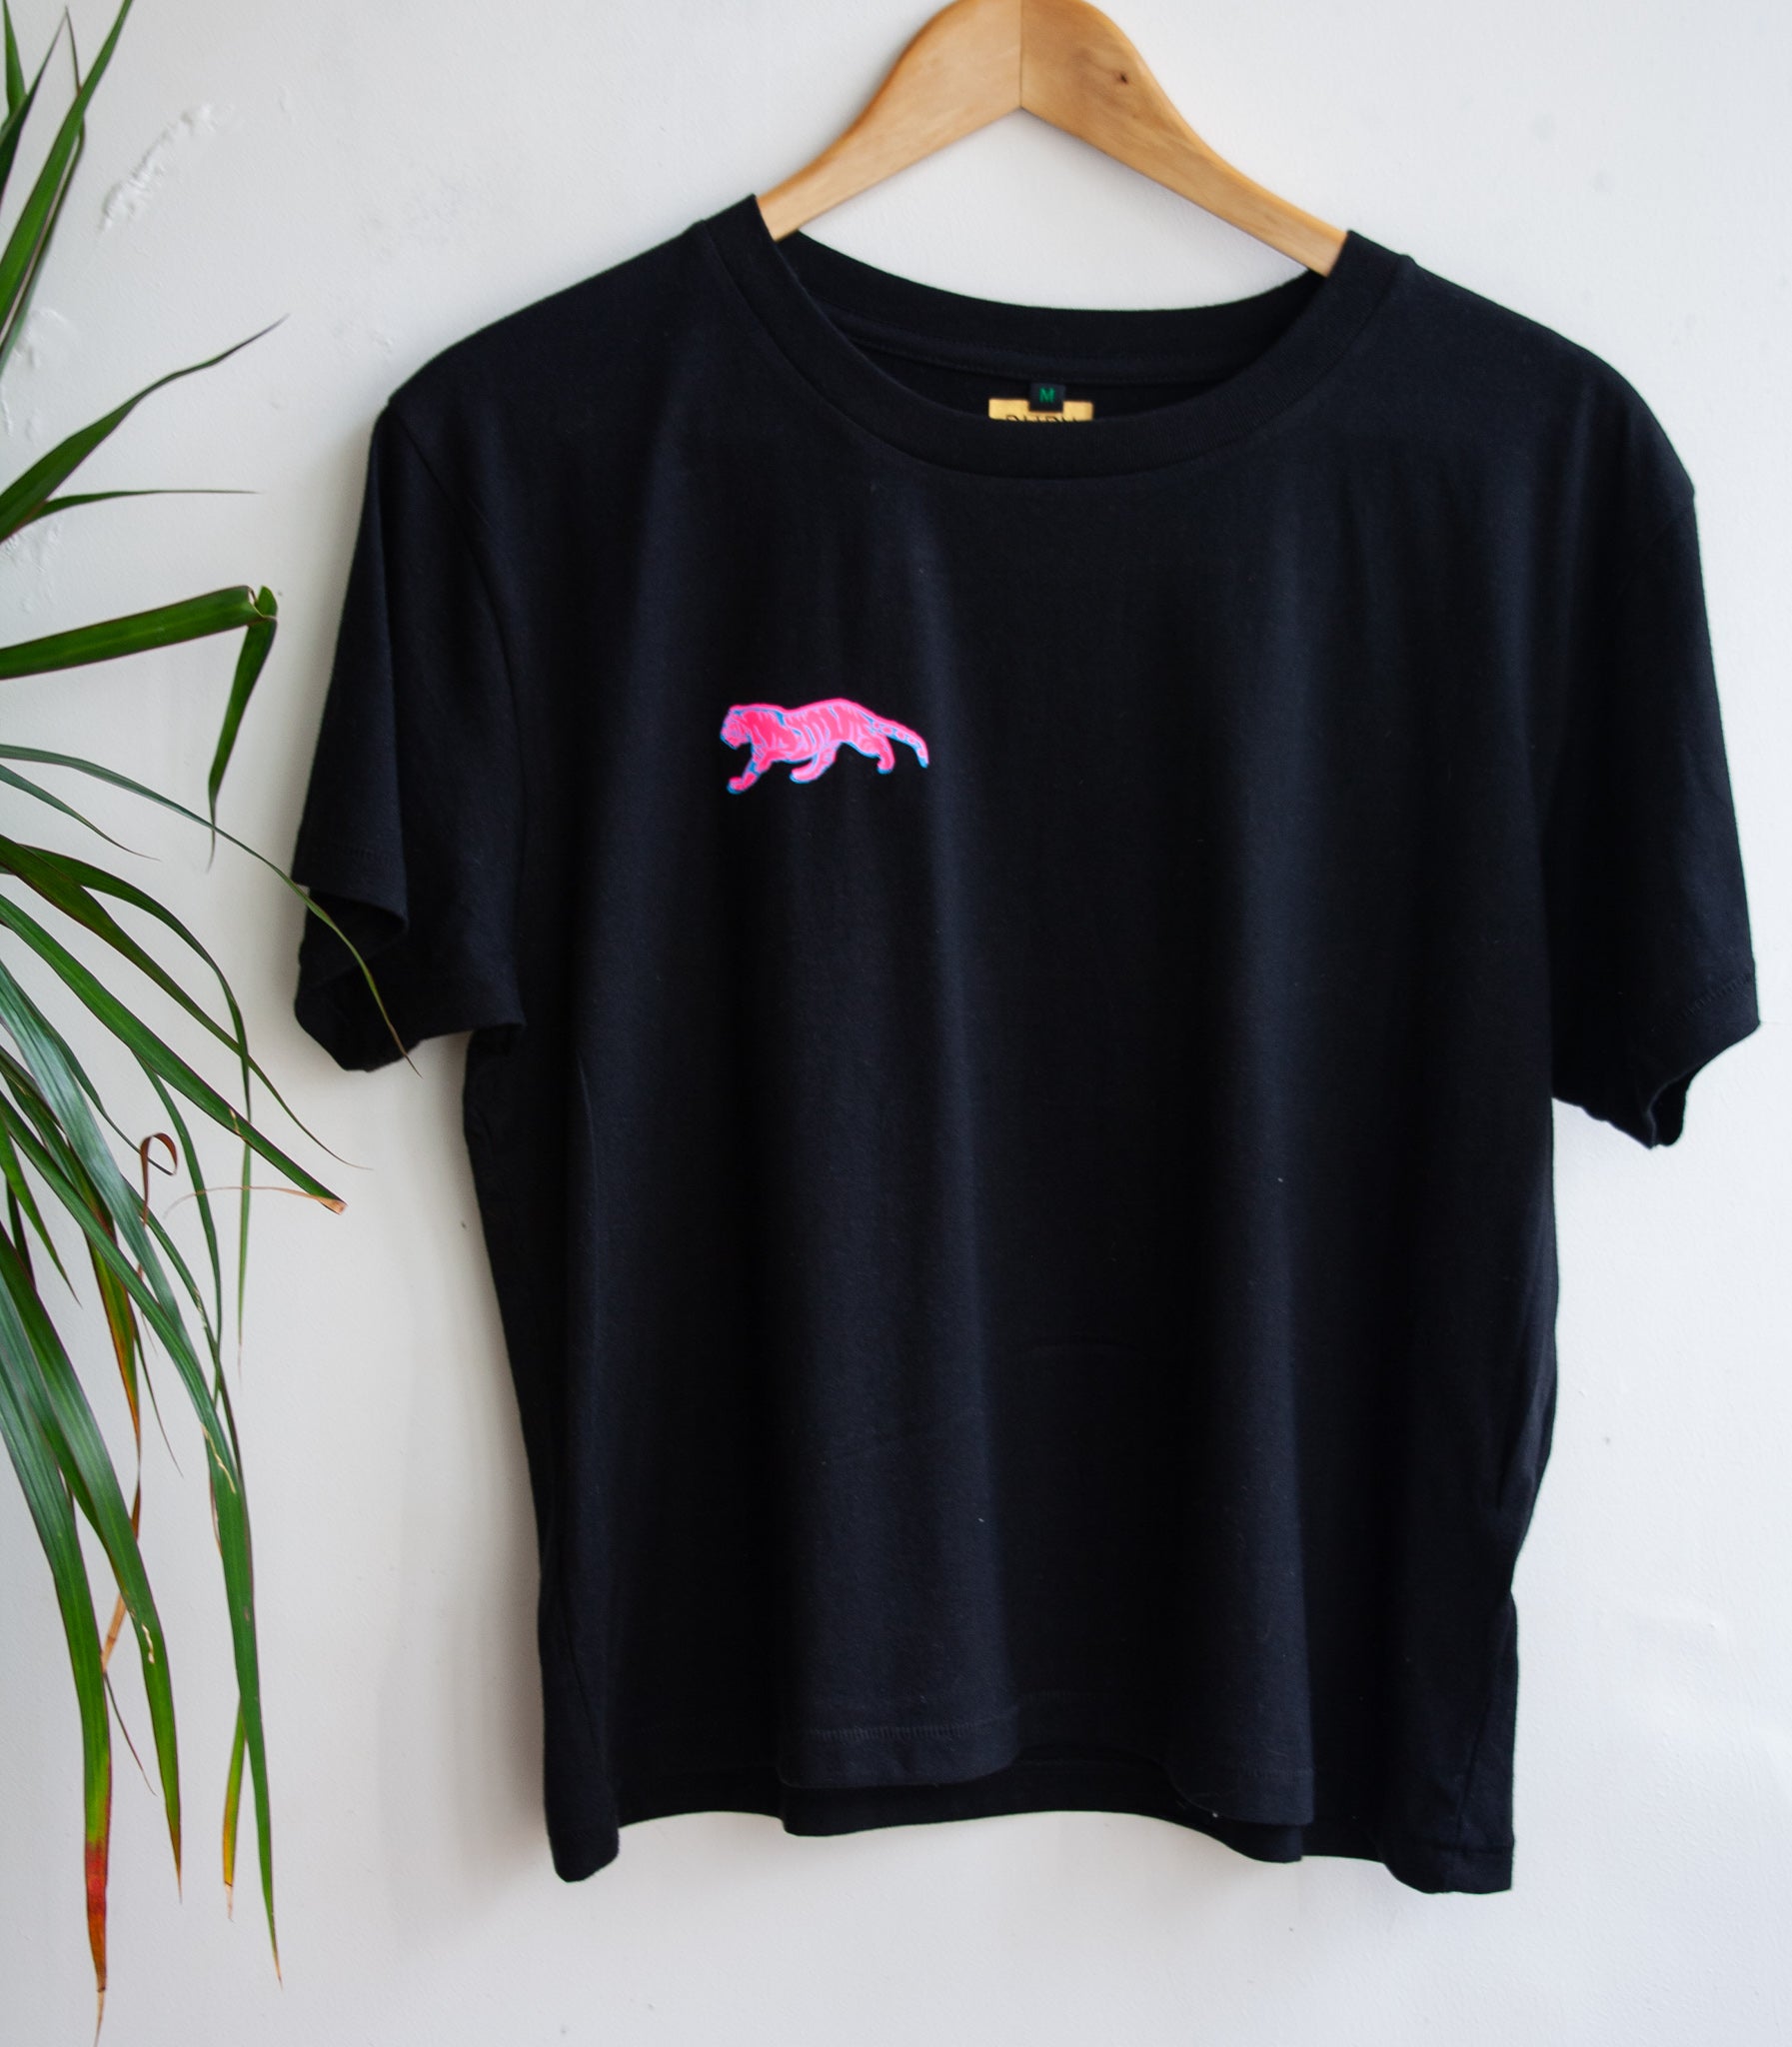 Black T-shirt with Pink and Blue Tiger Design